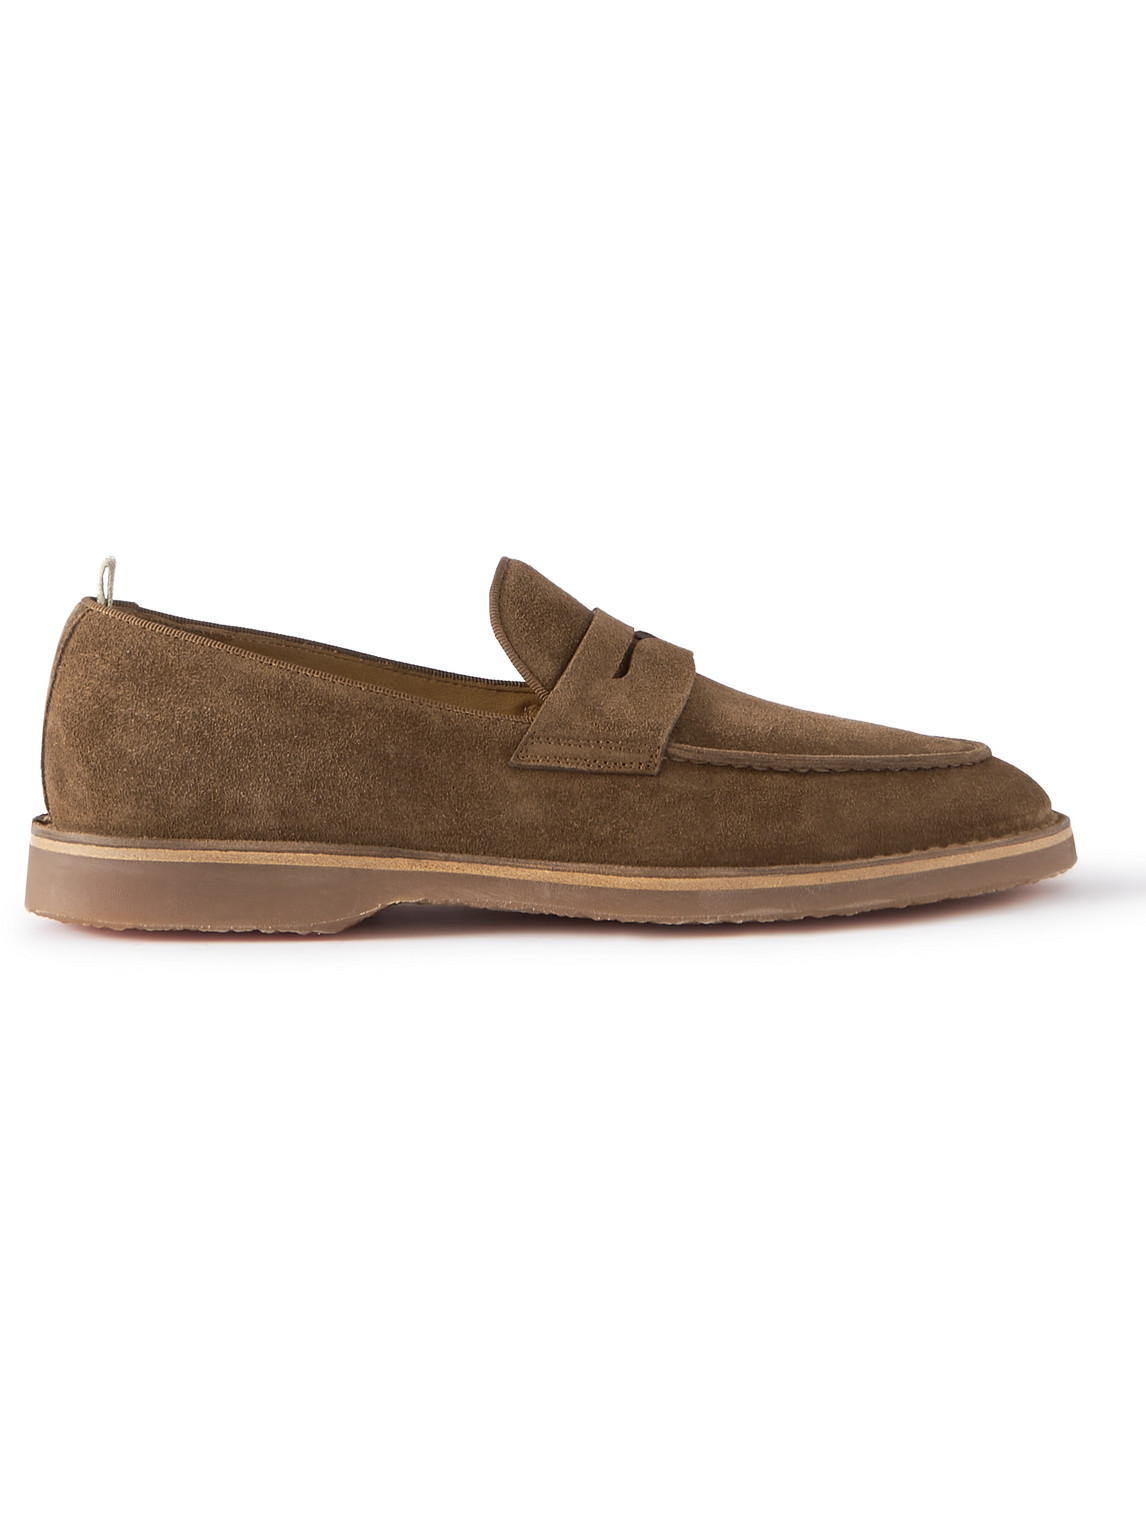 OFFICINE CREATIVE KENT SUEDE PENNY LOAFERS